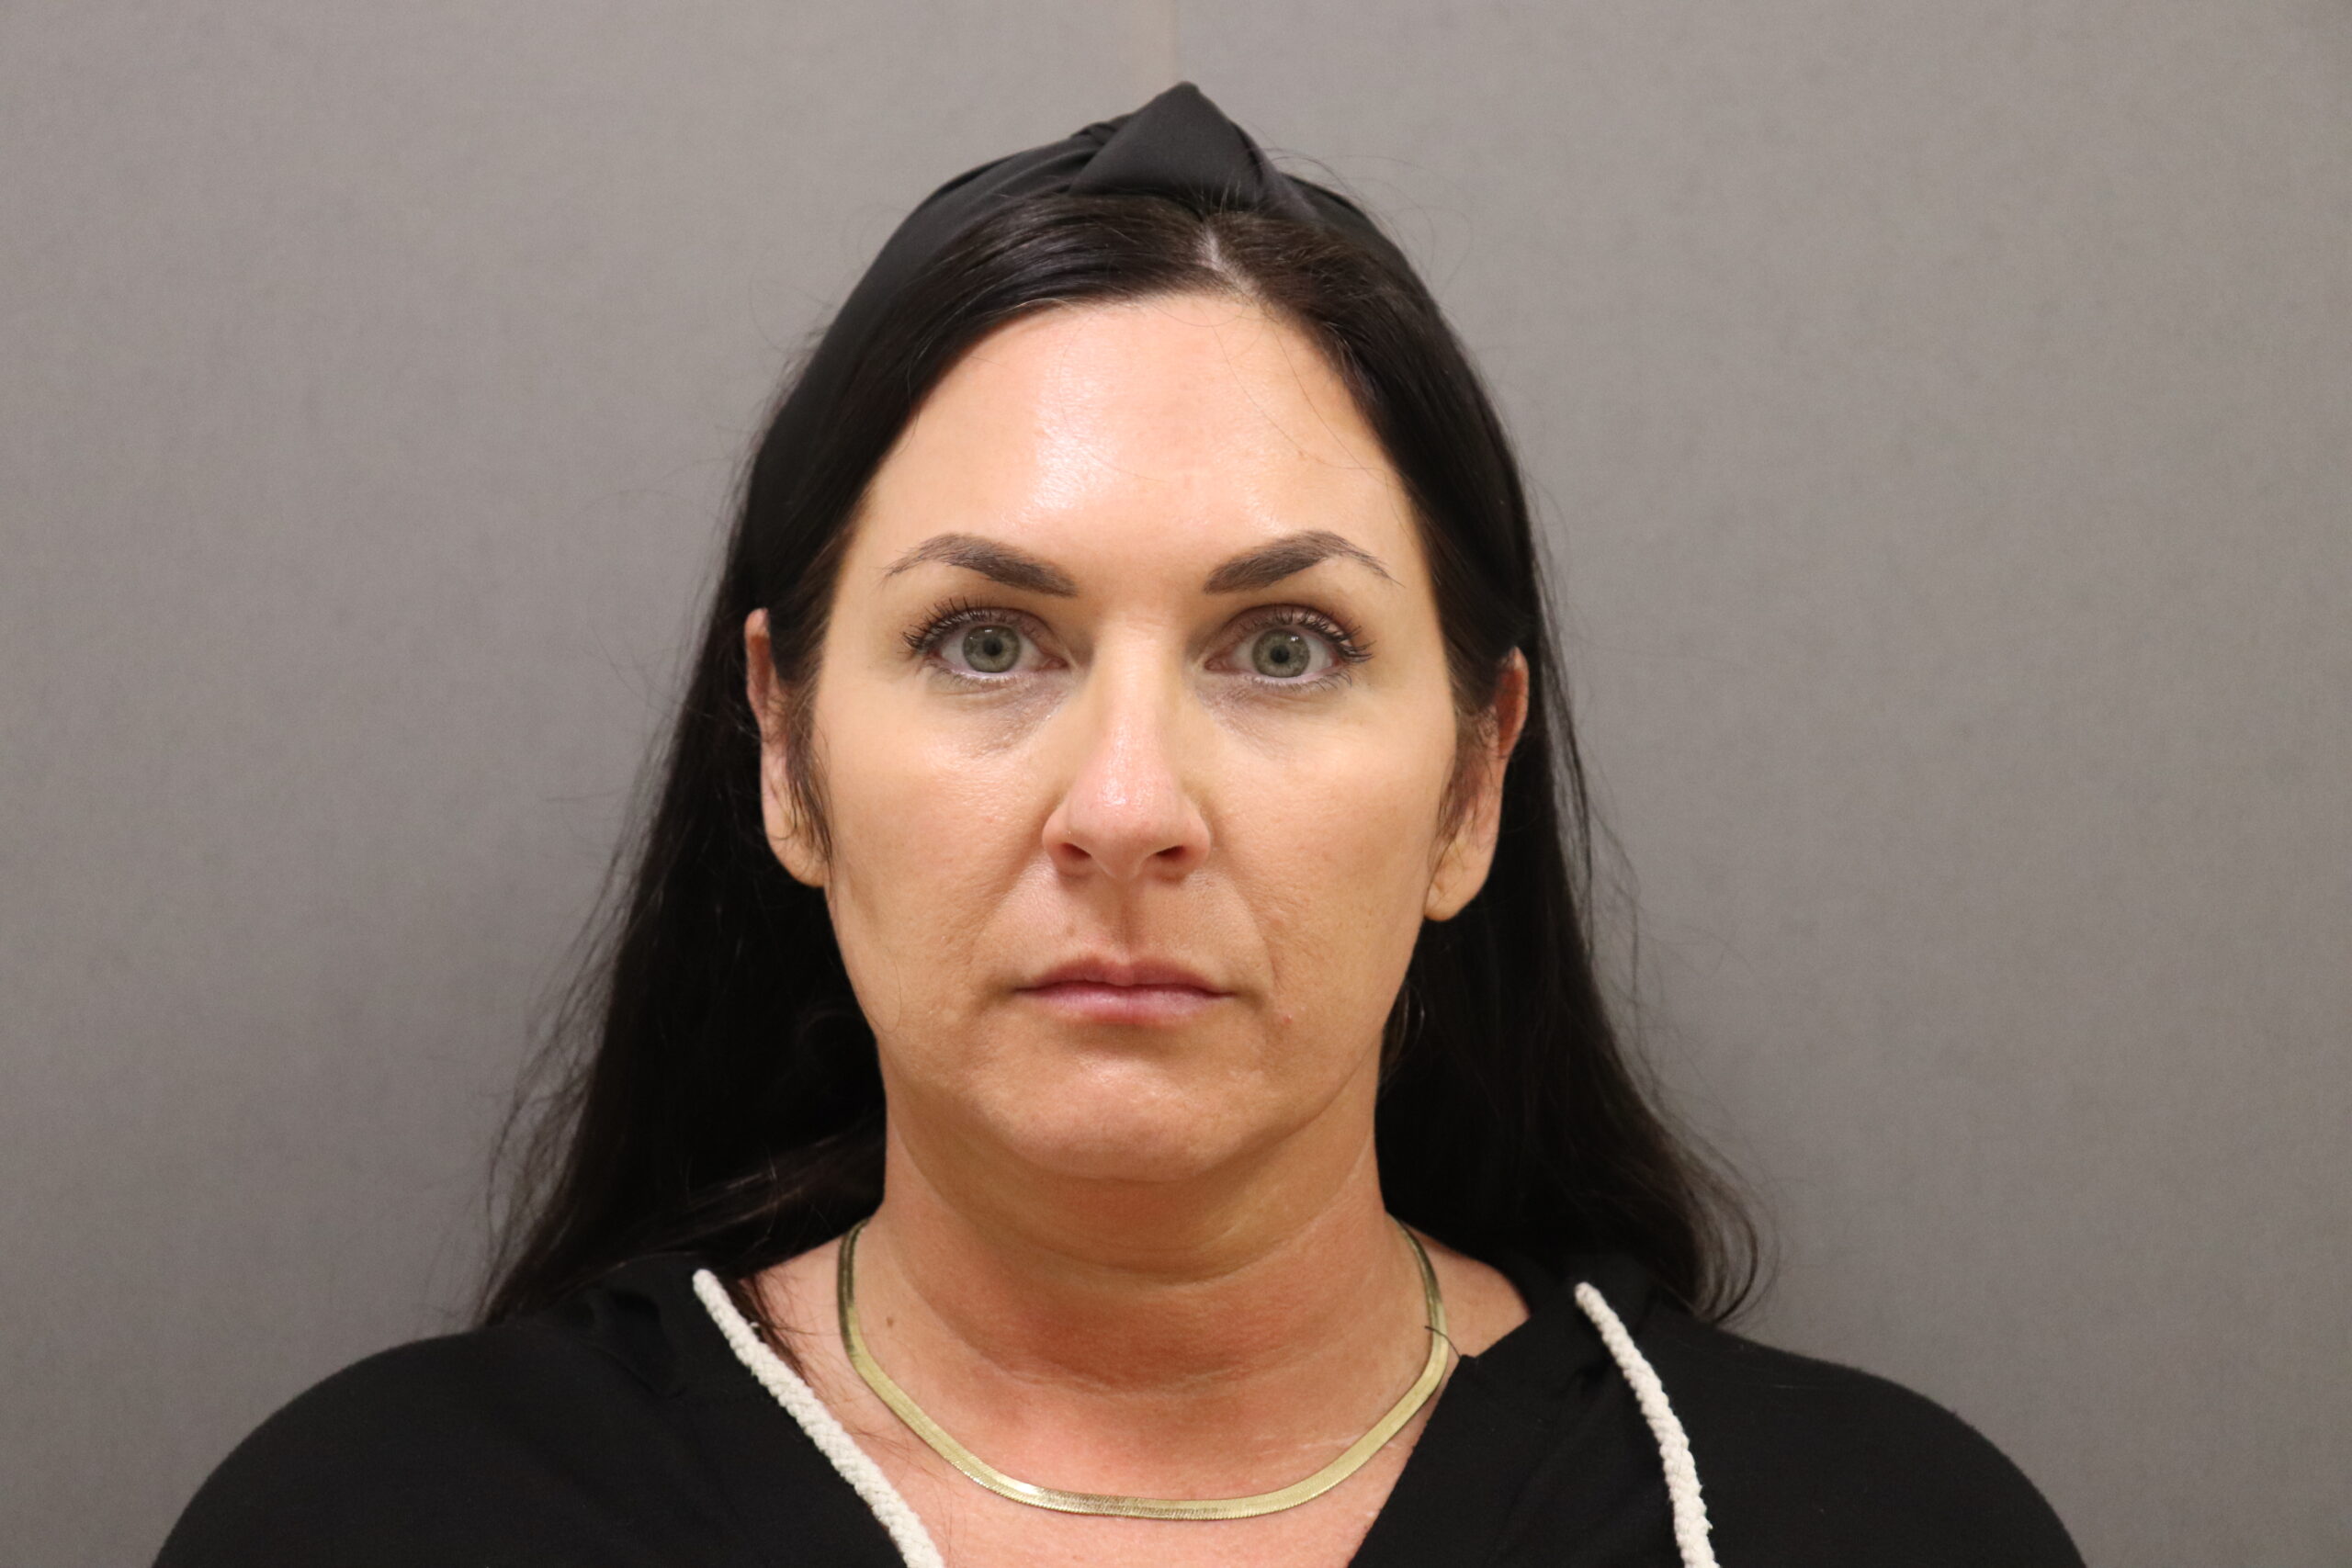 California Woman Flagged As Fugitive For Grand Theft Auto At St. Thomas Airport